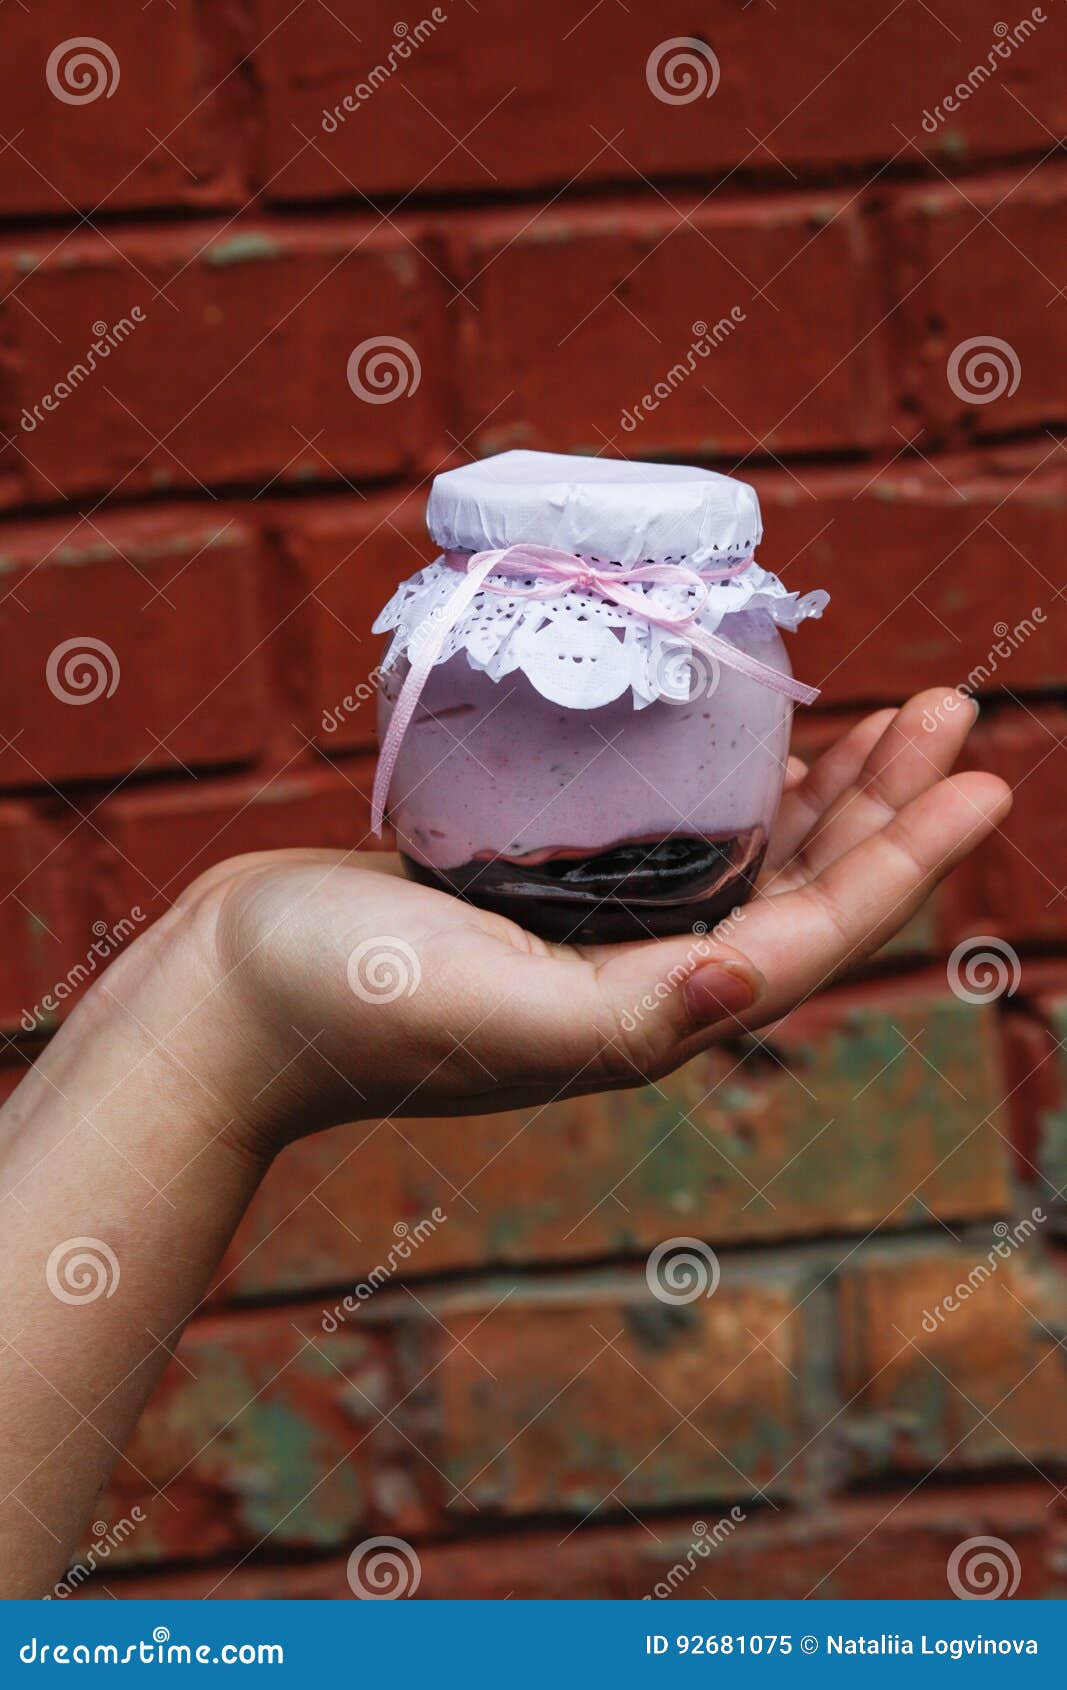 Creamy Dessert In A Small Glass Jar With Decoration And